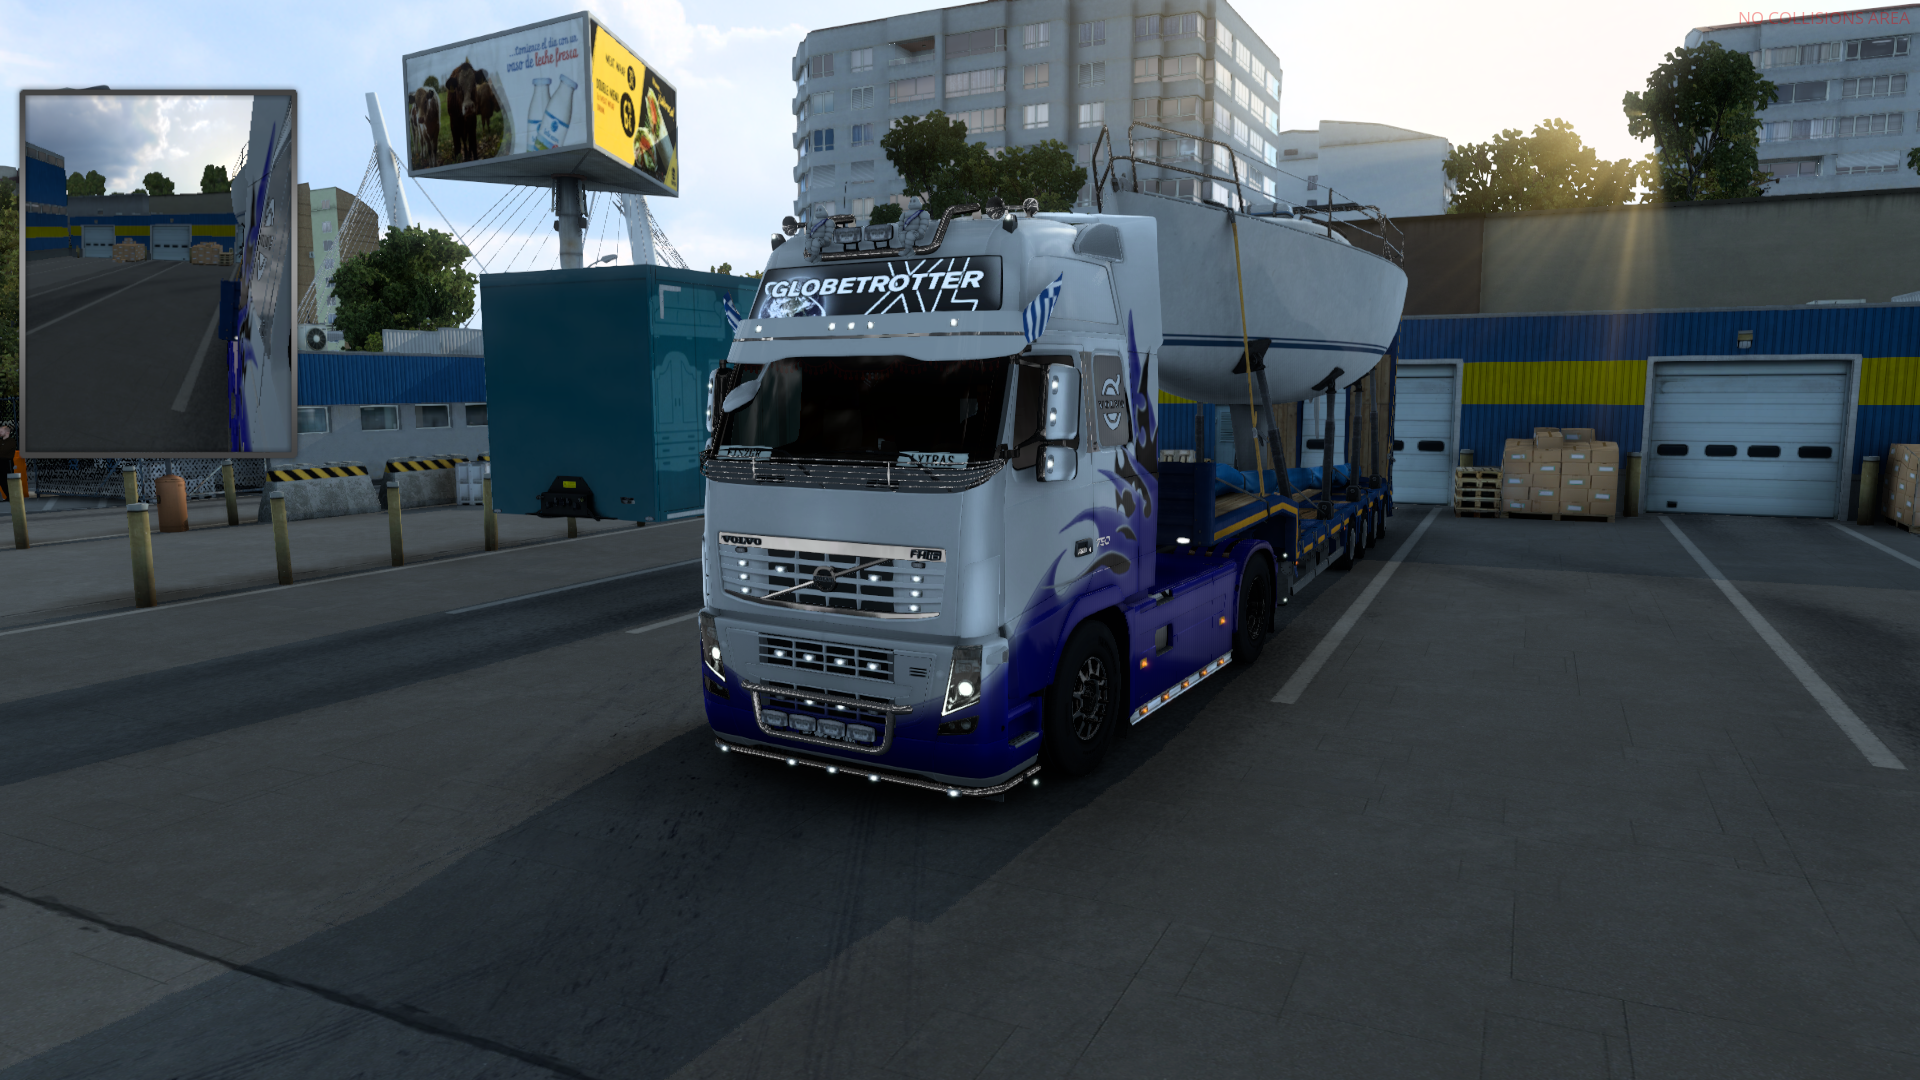 ets2_20220929_151254_00.png